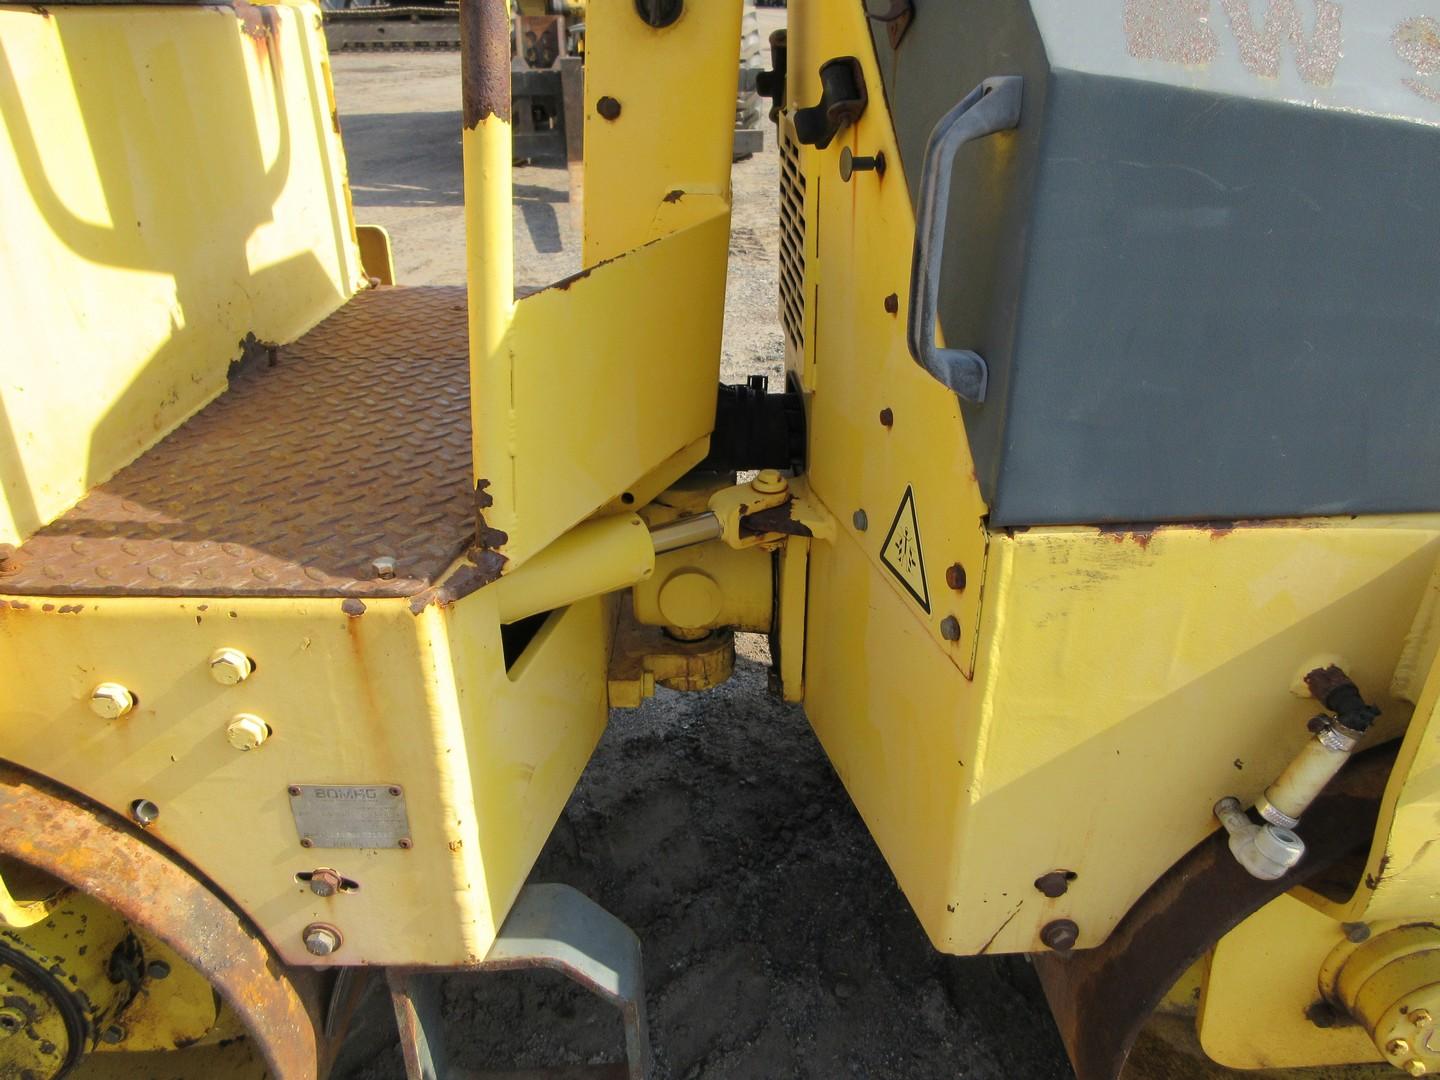 2001 Bomag BW900 Double Drum Vibratory Roller